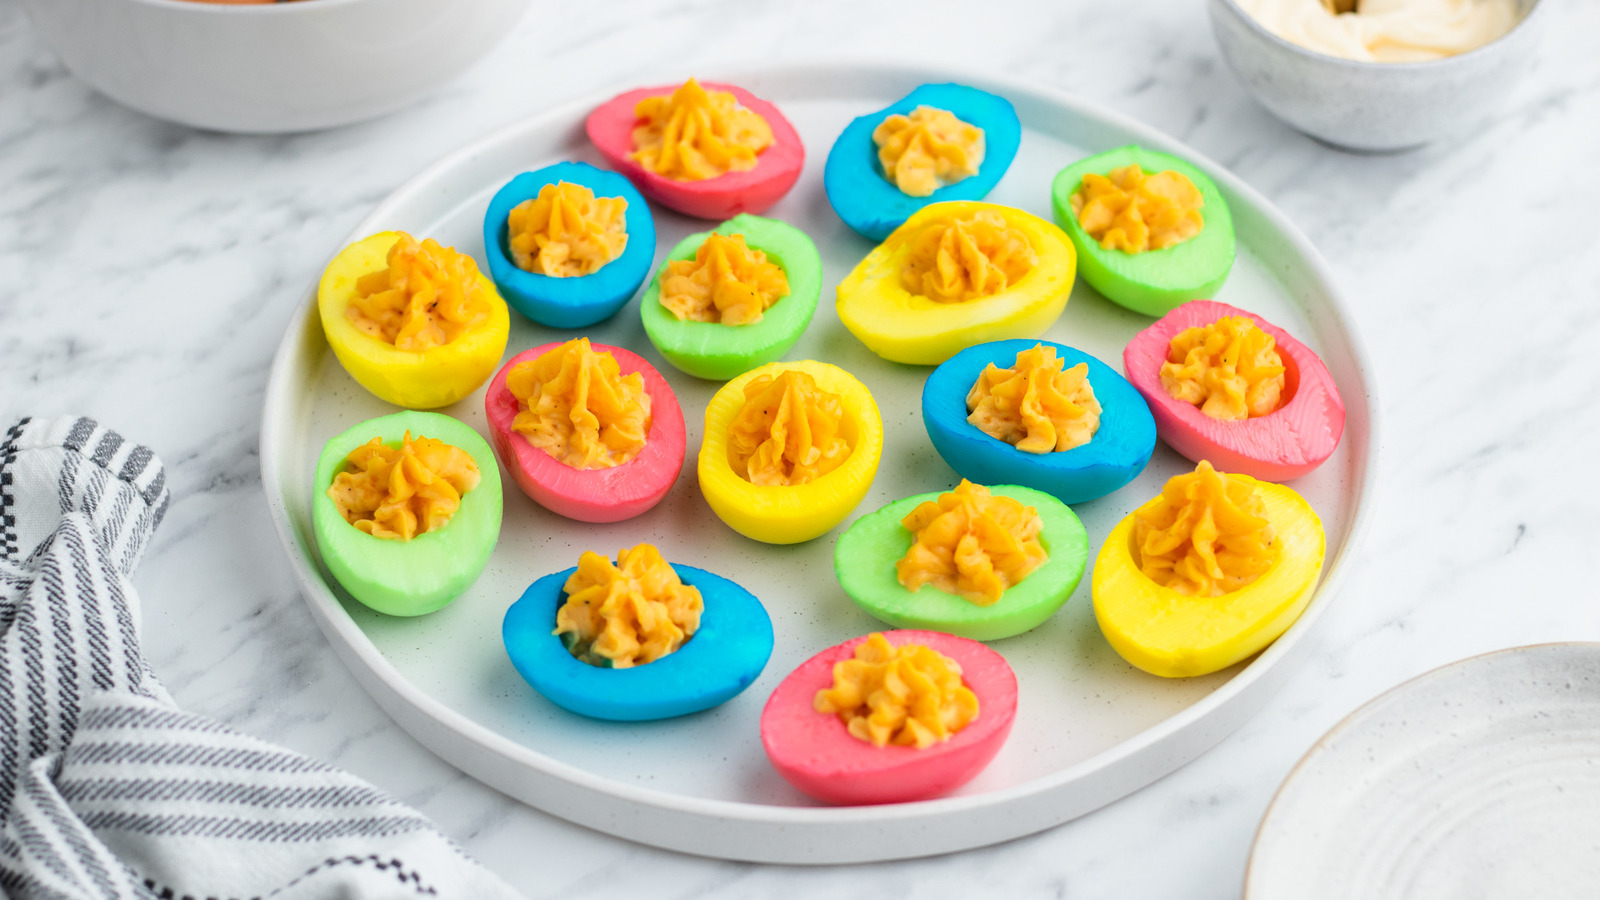 https://www.mashed.com/img/gallery/easter-deviled-eggs-recipe/l-intro-1649165143.jpg